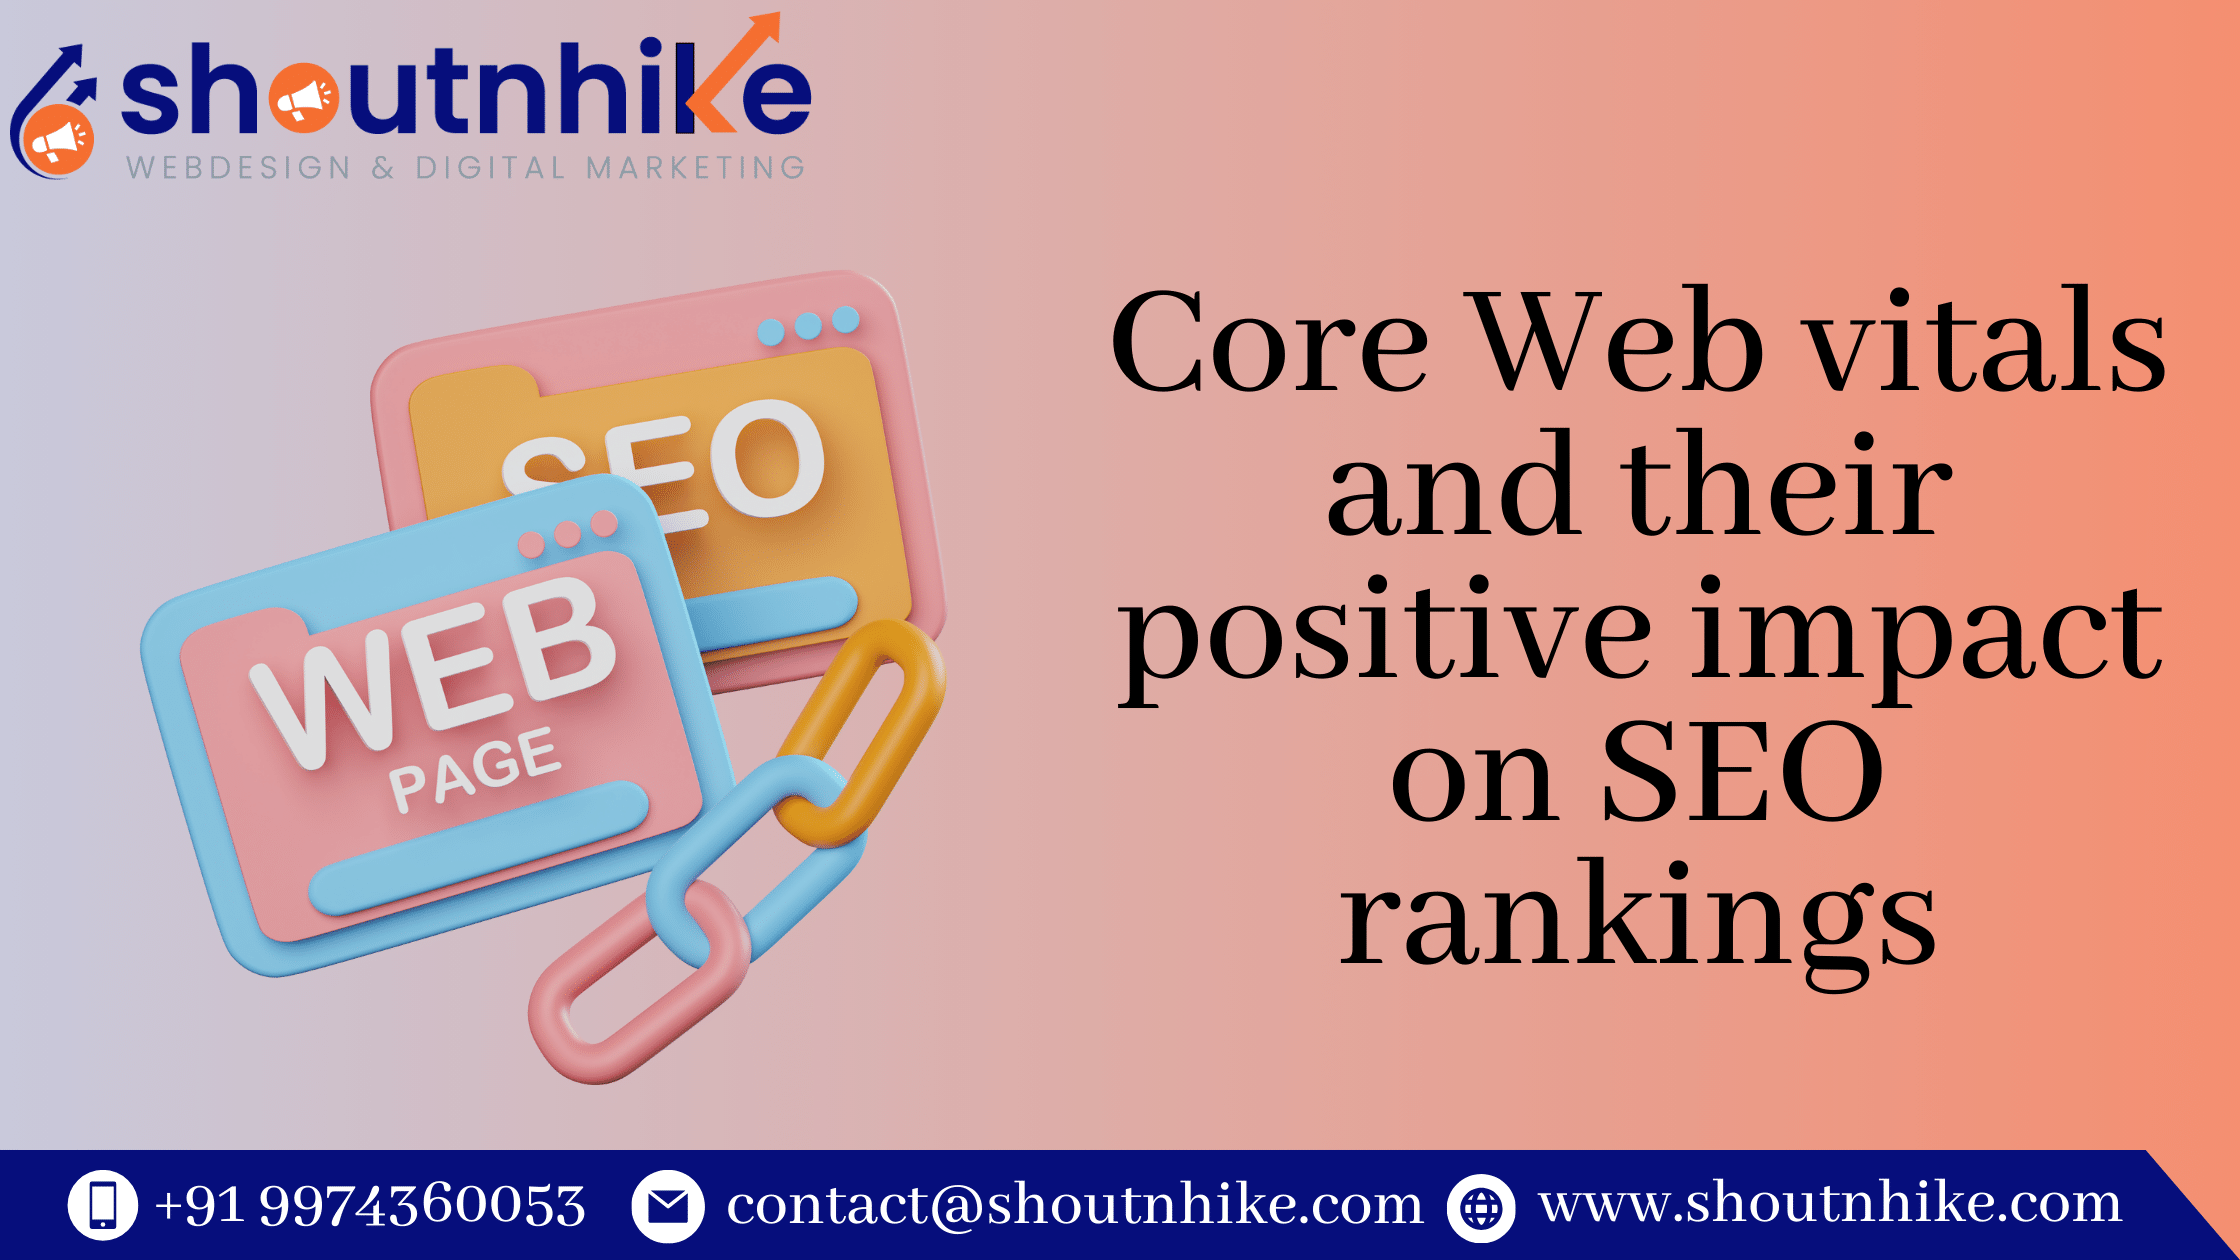 Core Web vitals and their positive impact on SEO rankings